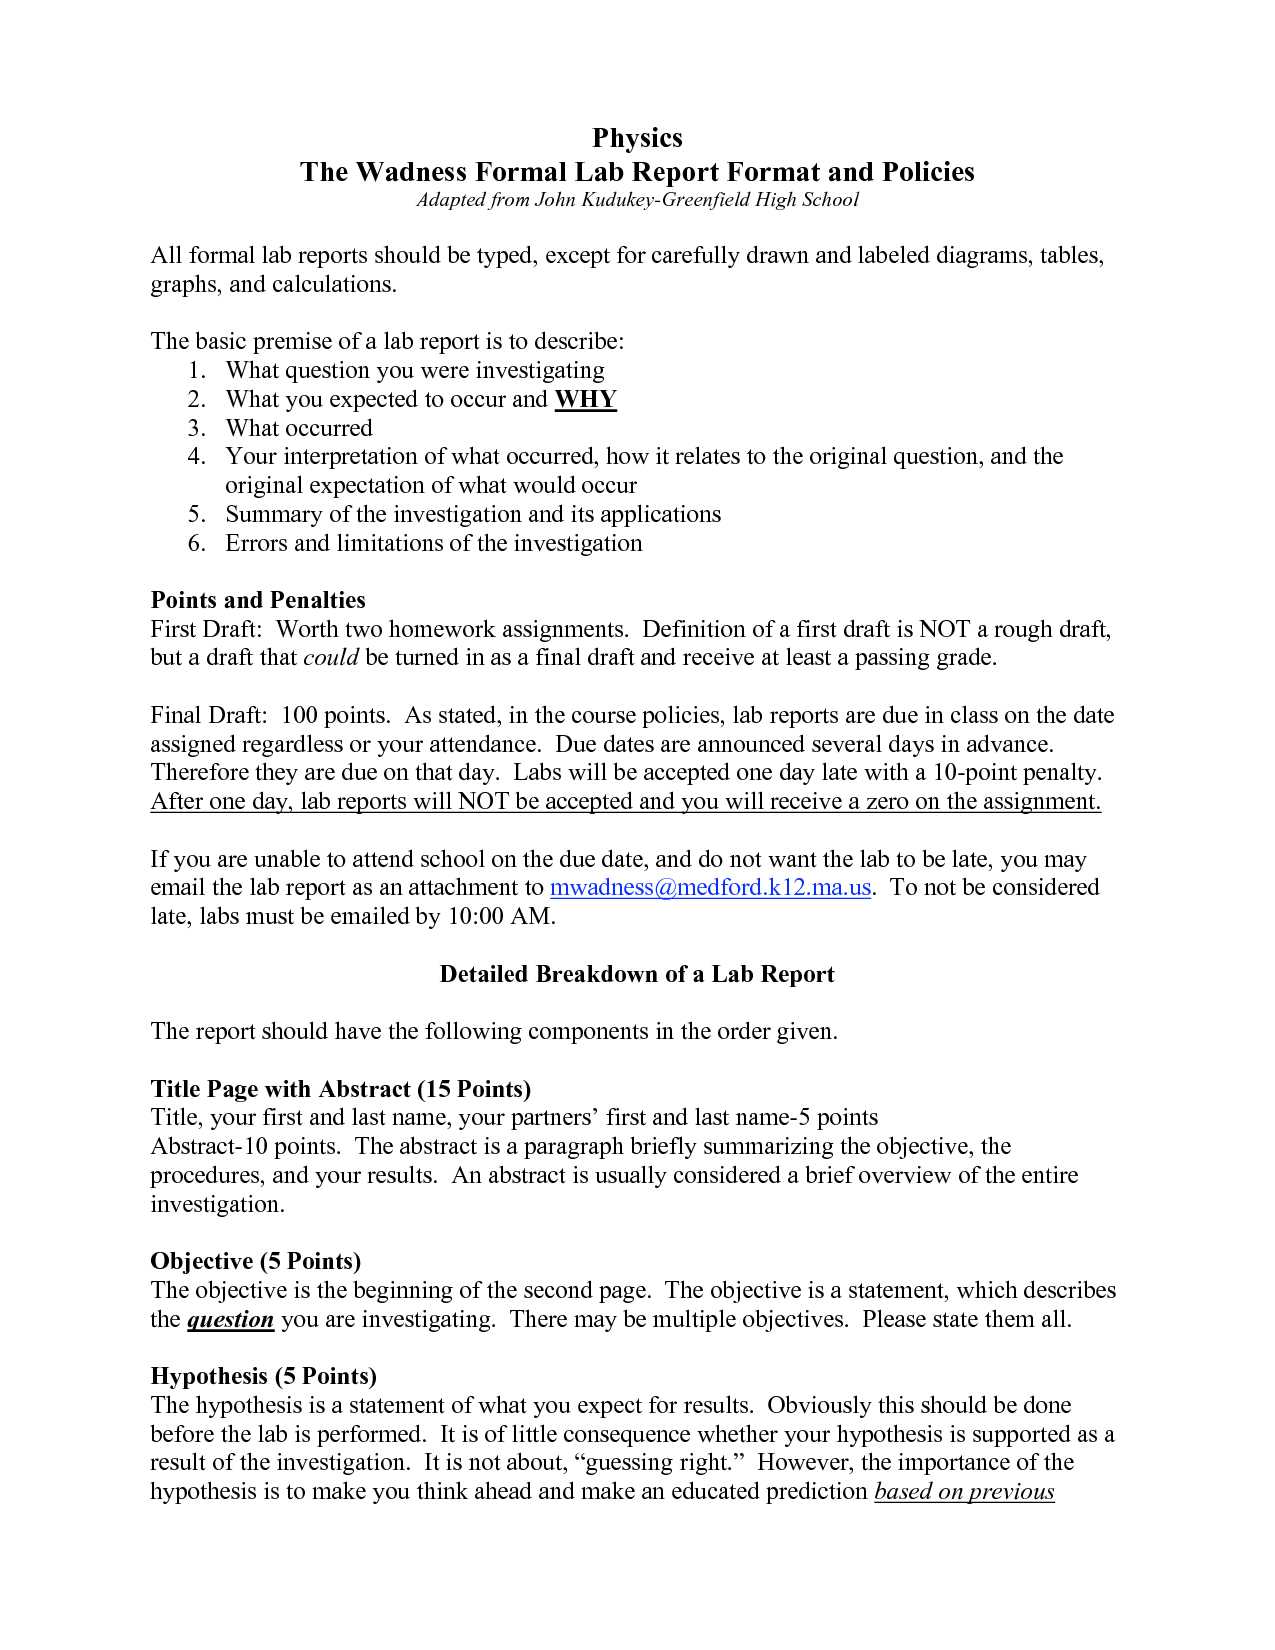 Formal Lab Report Template Physics : Biological Science For Physics Lab Report Template